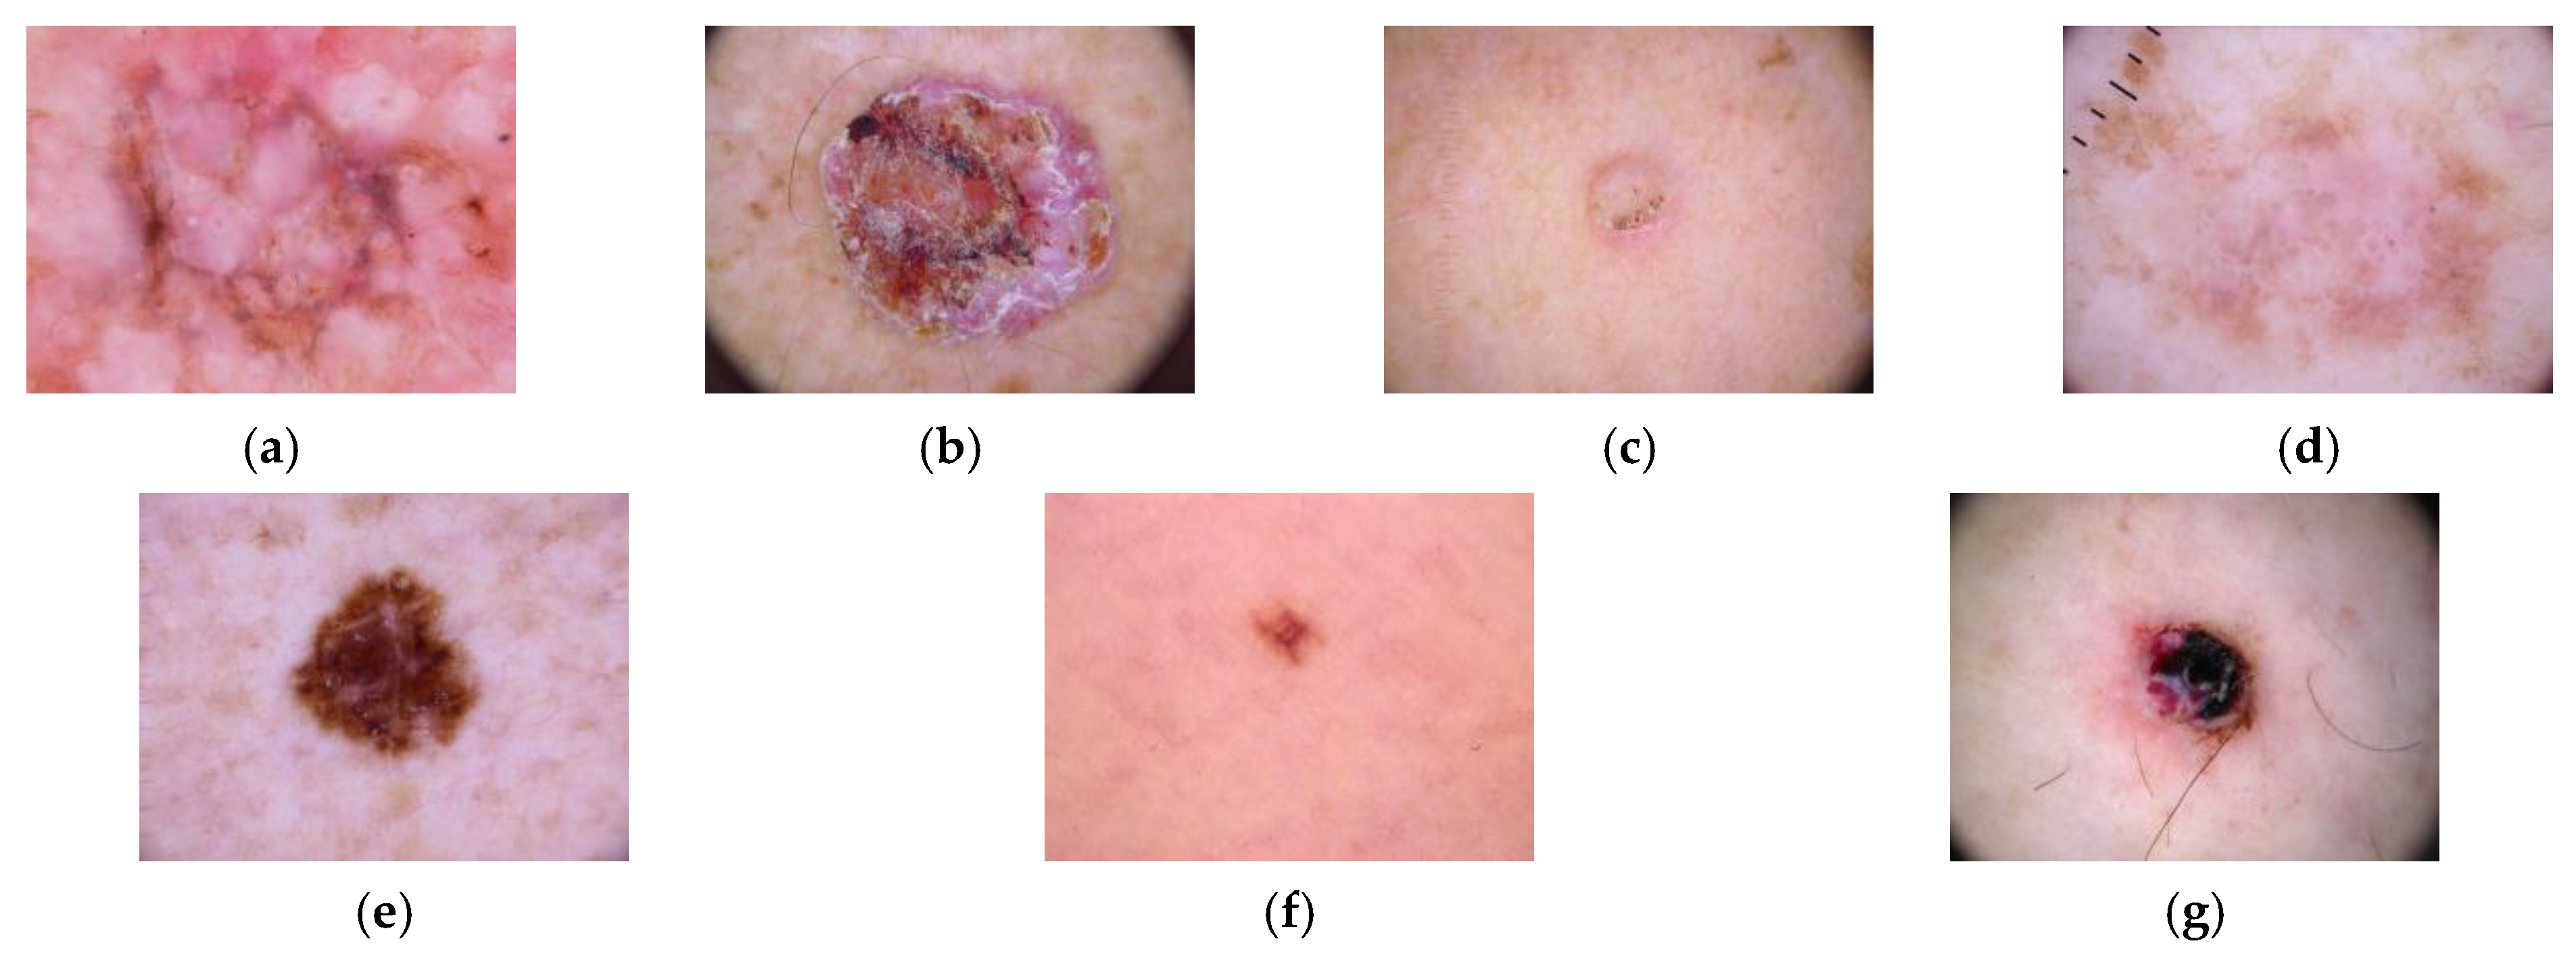 Applied Sciences | Free Full-Text | Skin Lesion Classification Using ...